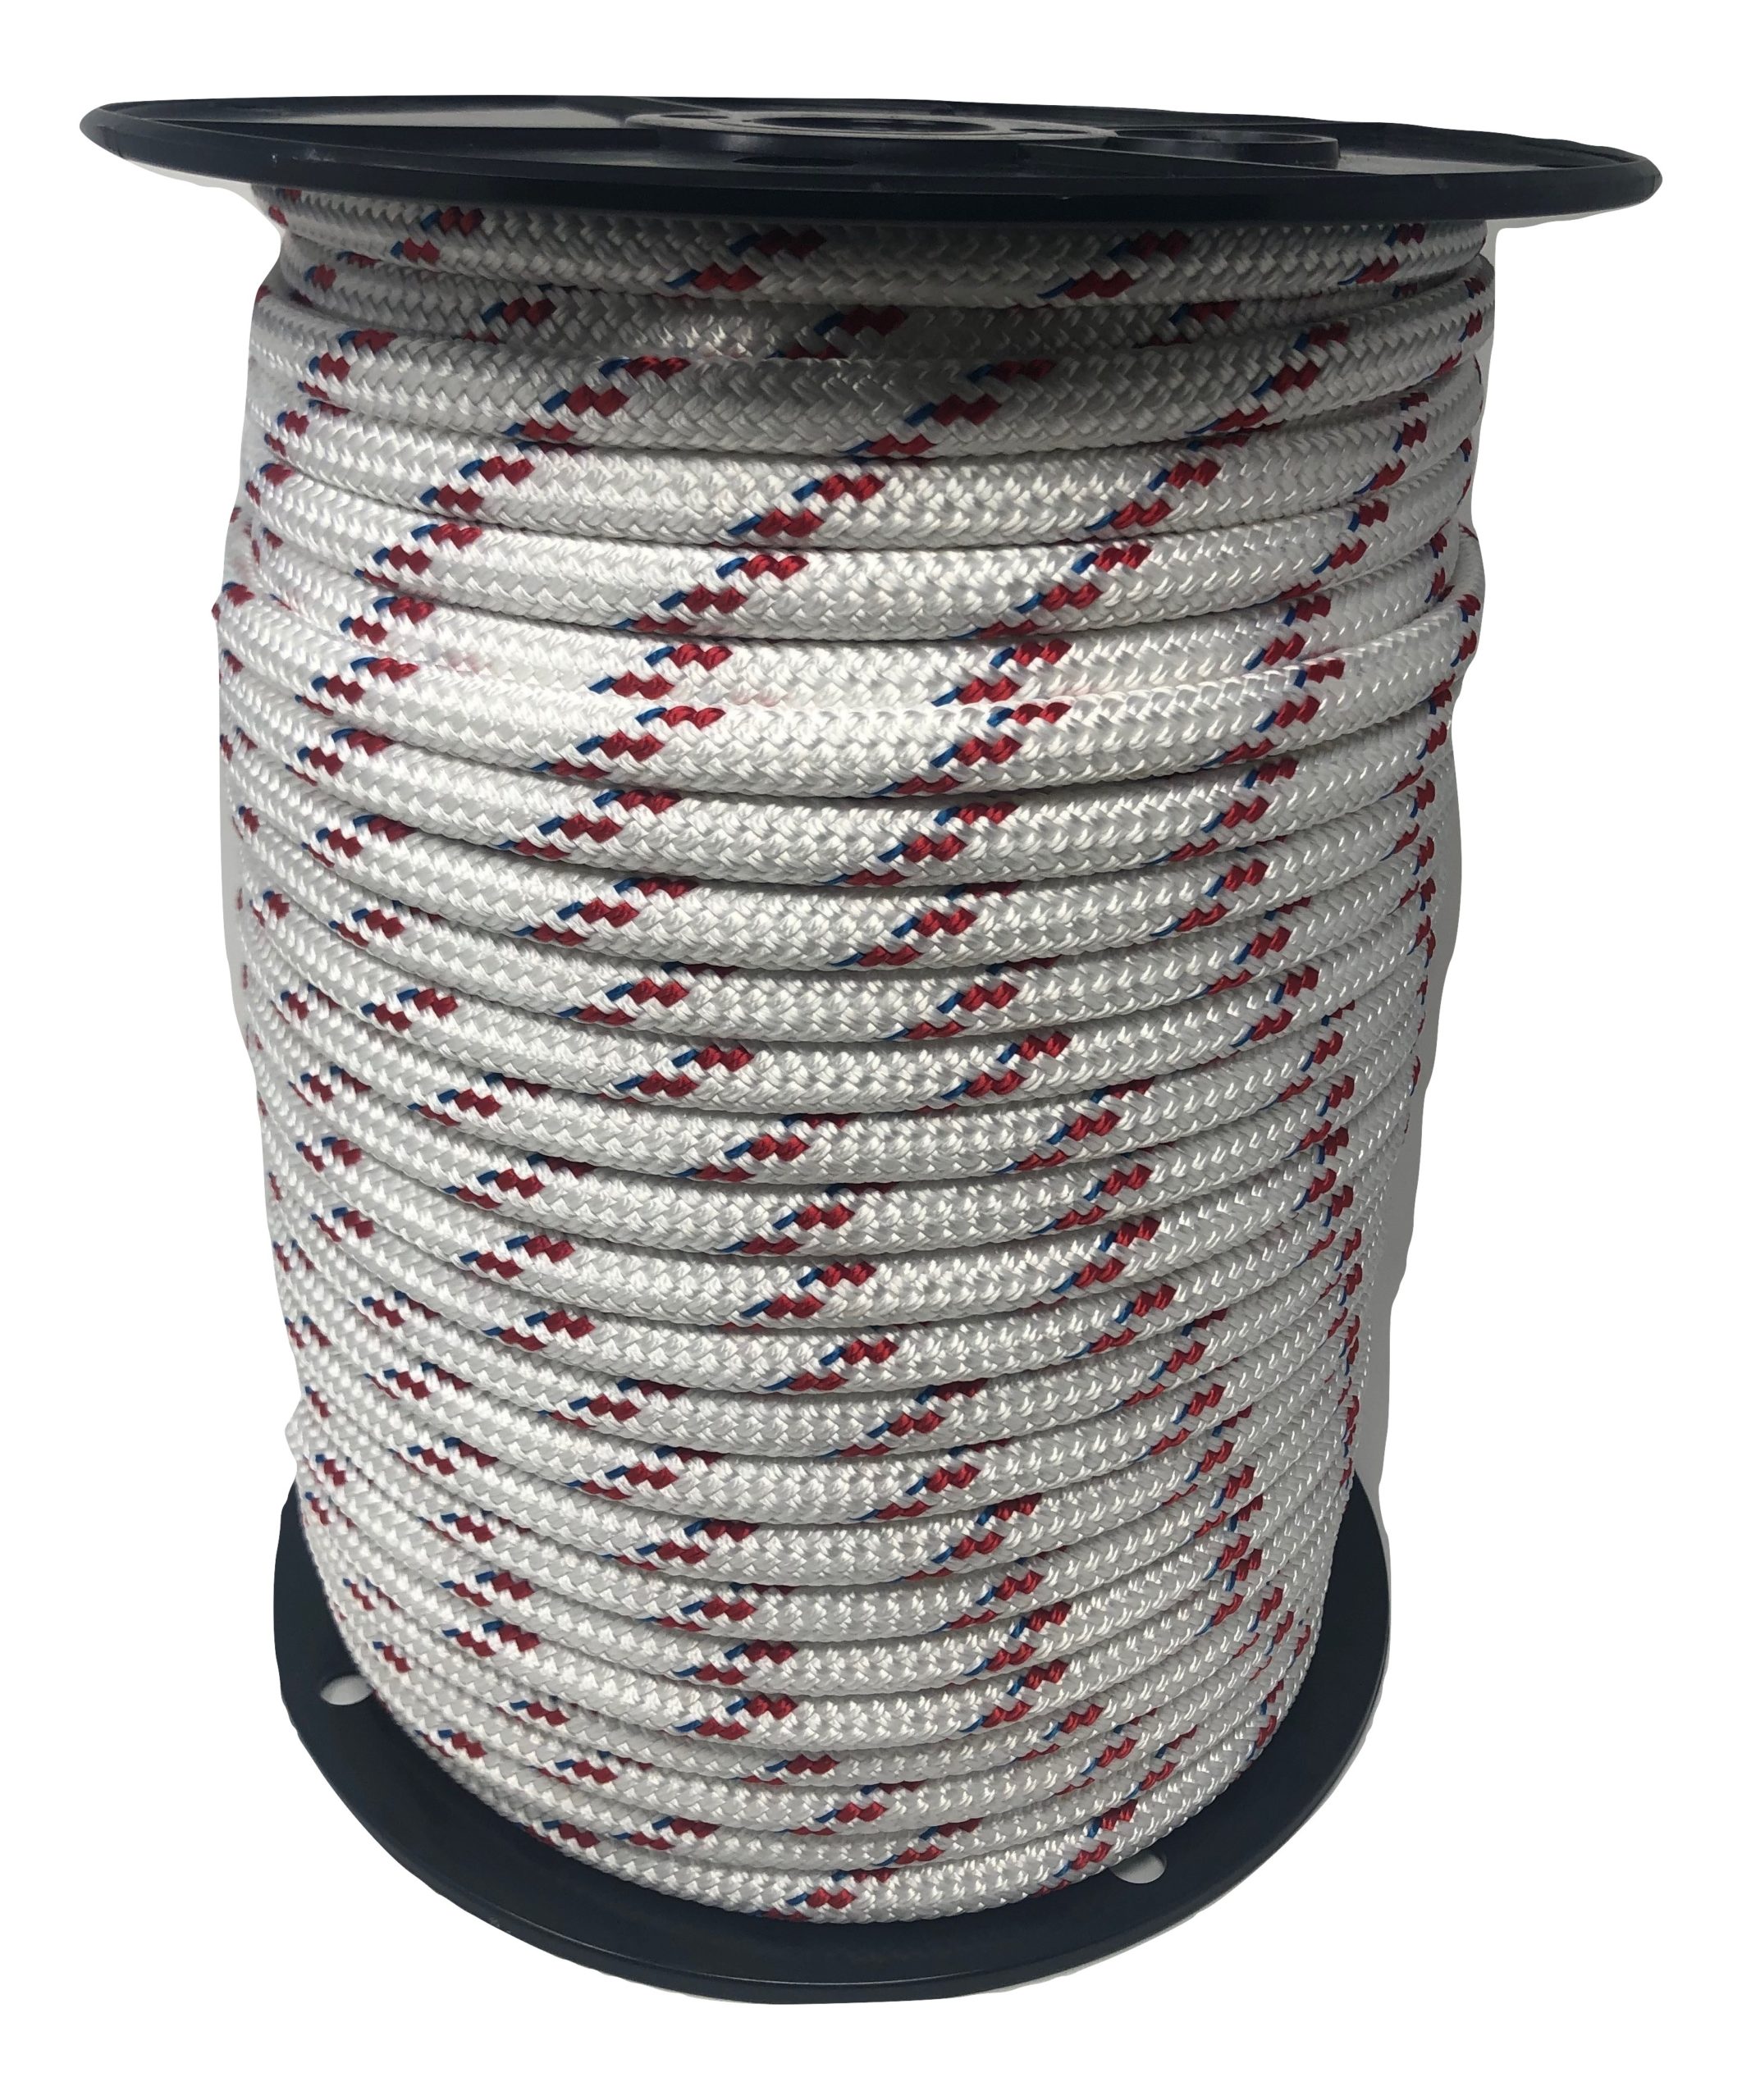 20 feet NEW 7/16" Double Braid Rope 6300Lbs BREAKING STRENGTH NEW 2018 Stock 